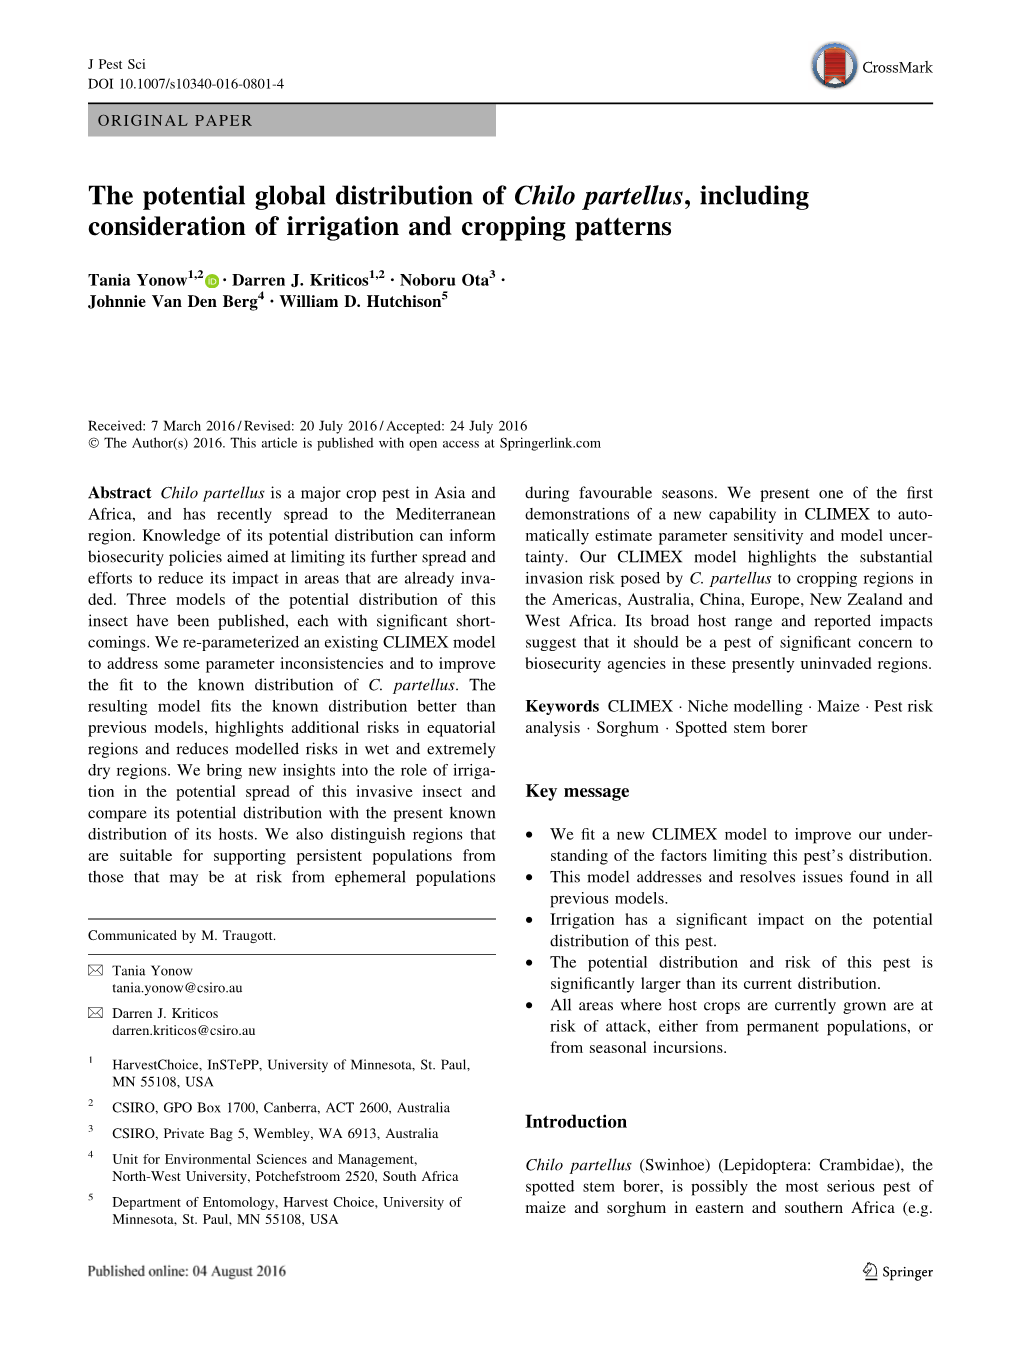 The Potential Global Distribution of Chilo Partellus, Including Consideration of Irrigation and Cropping Patterns